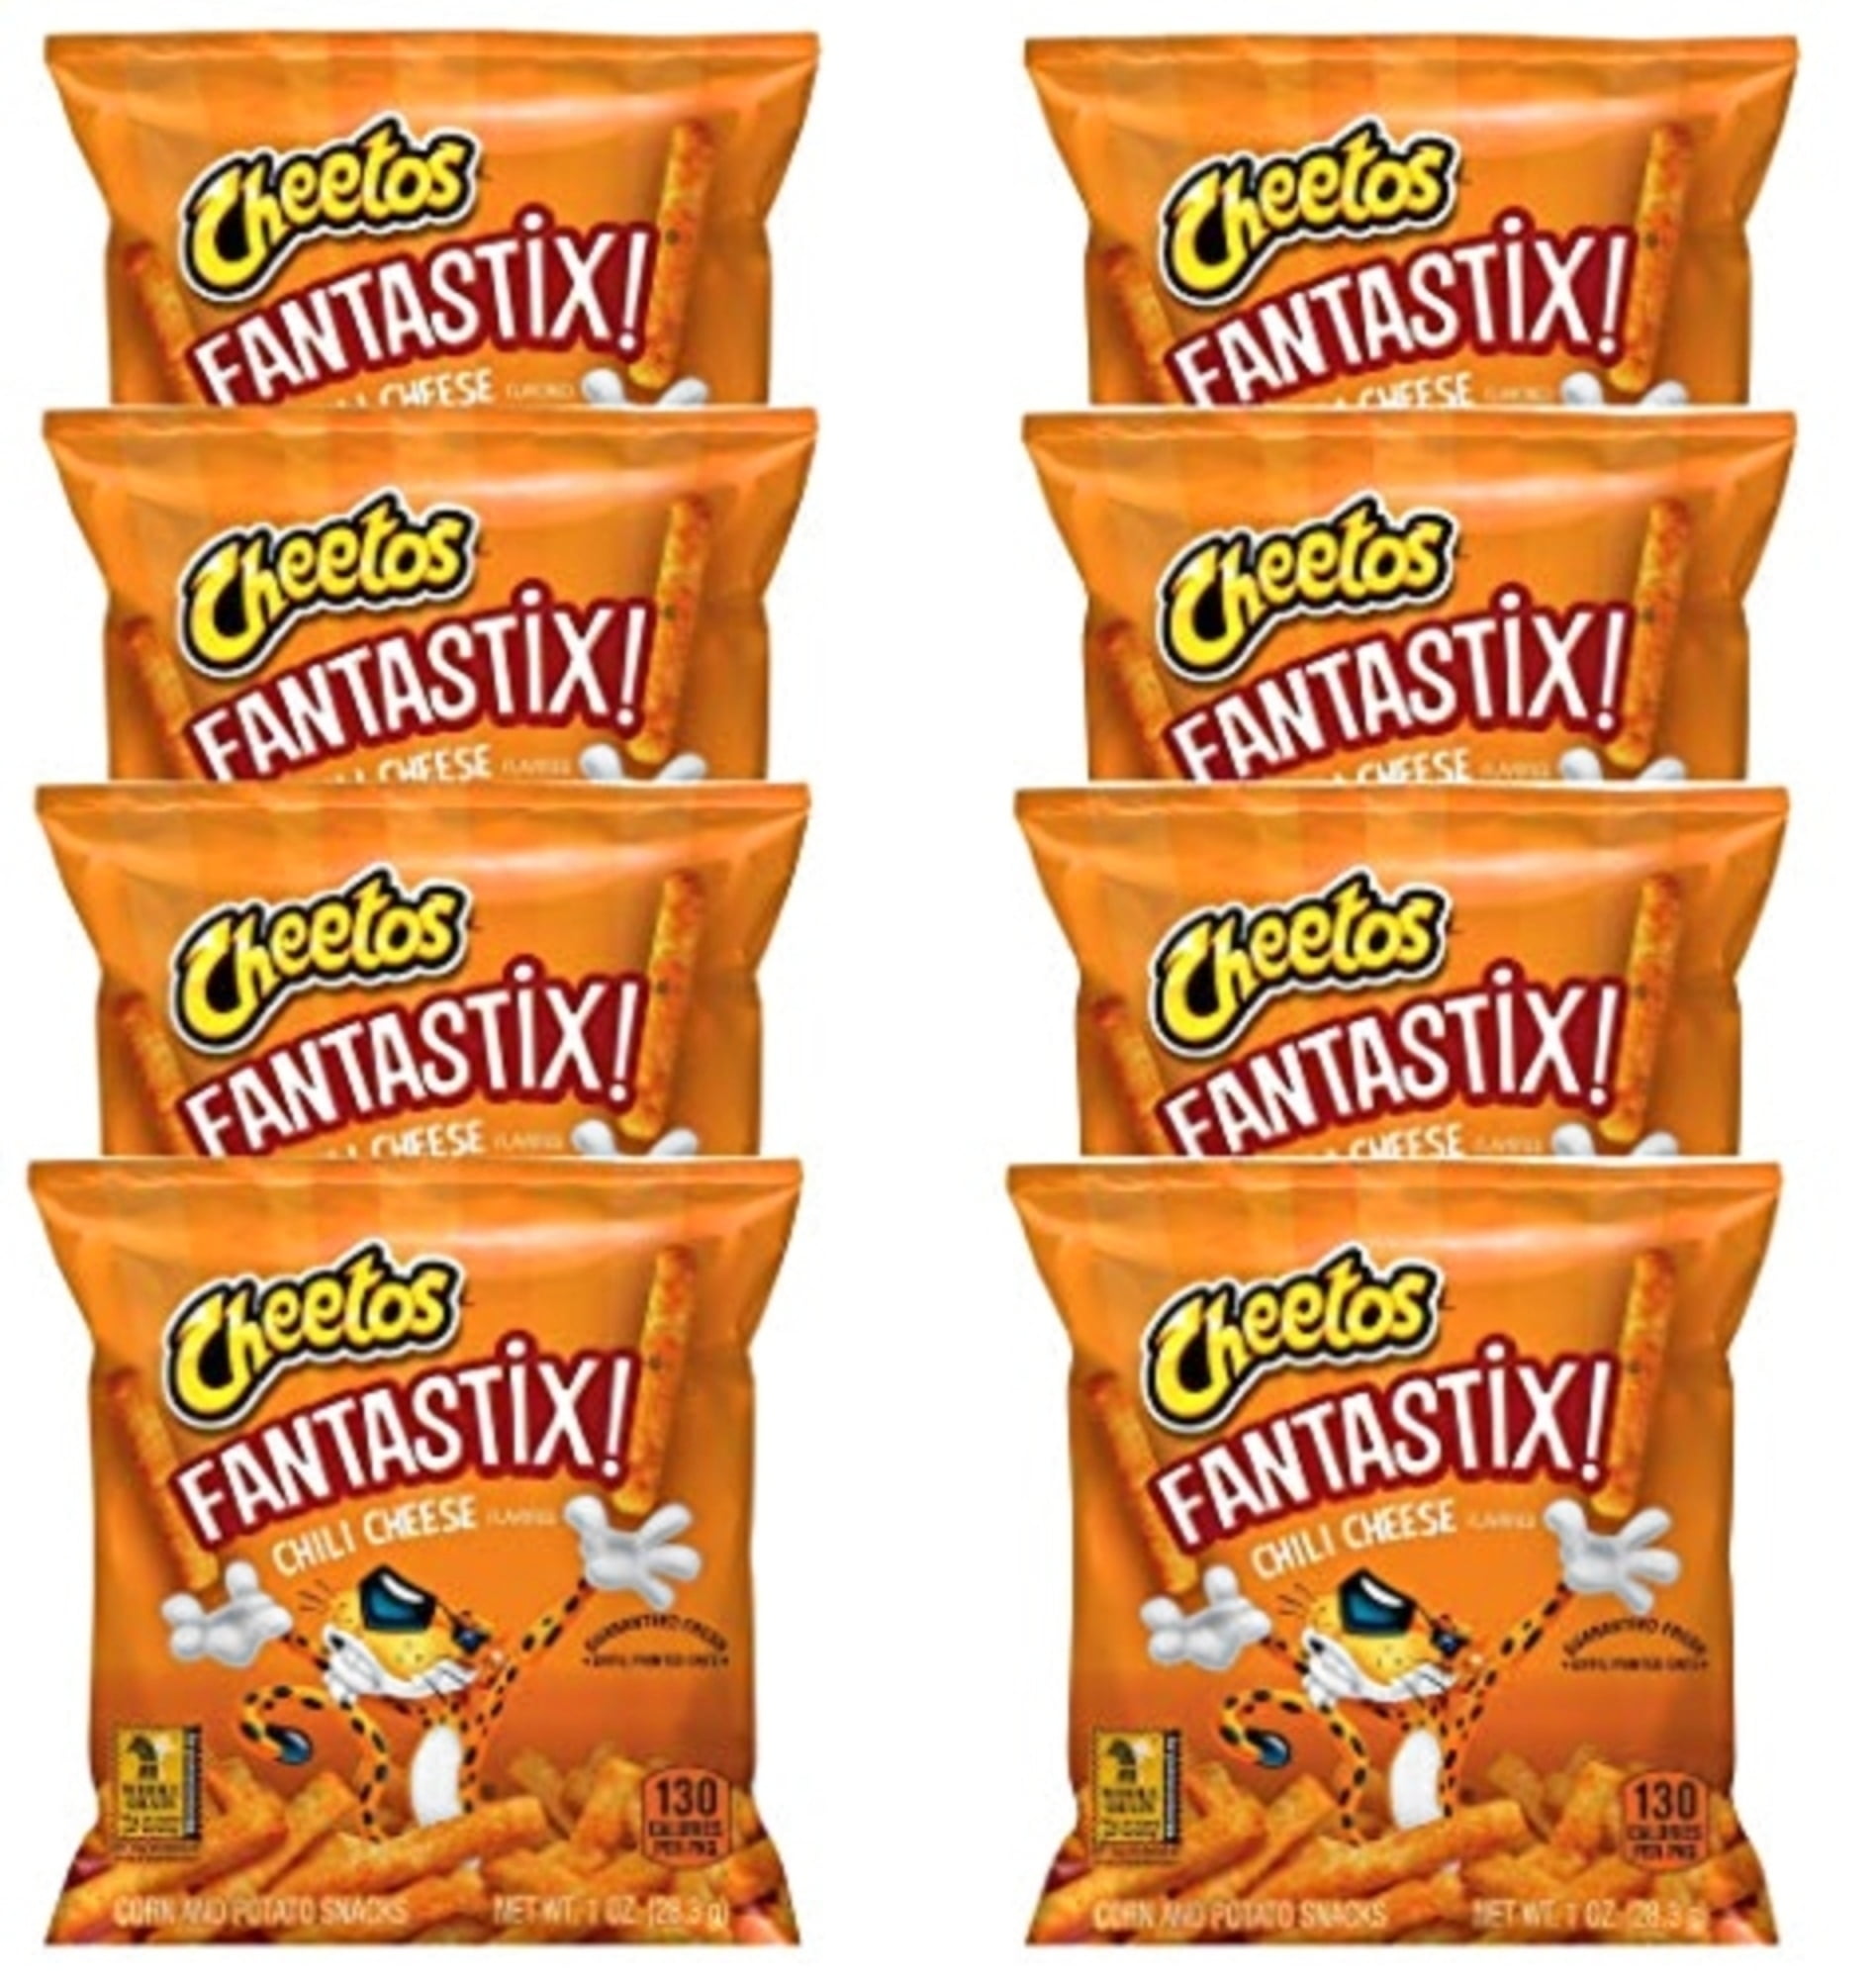 Snackoree on X: Amazing #Chilicheese flavor available NOW with Cheetos  Fantastix Chili Cheese! Get some while supplies last!   #Cheetos #Fantastix #Smartsnacking   / X